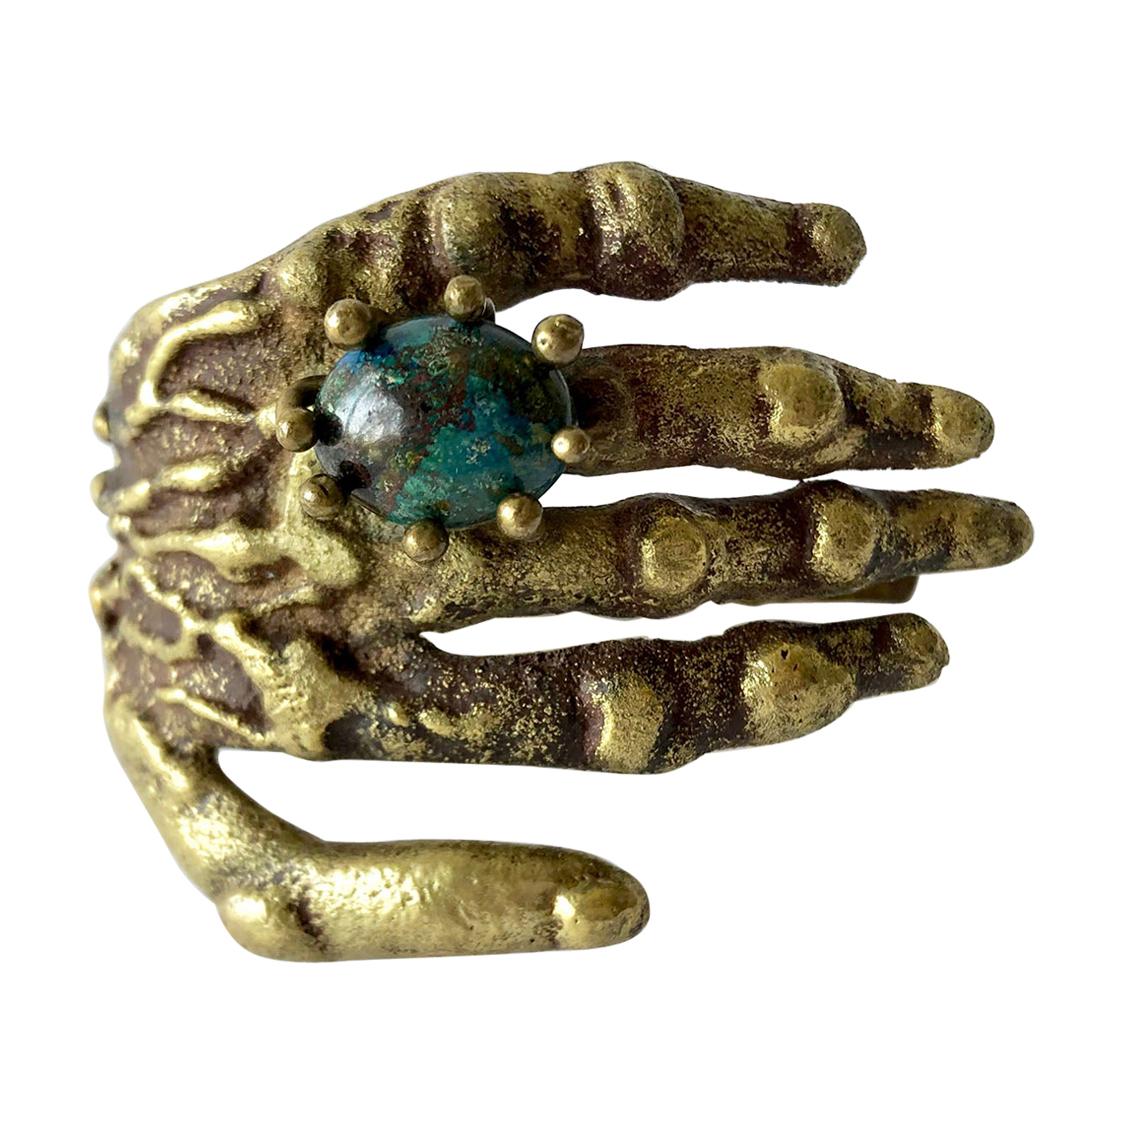 Pal Kepenyes Bronze Turquoise Mexican Surrealist Hand with Ring Bracelet